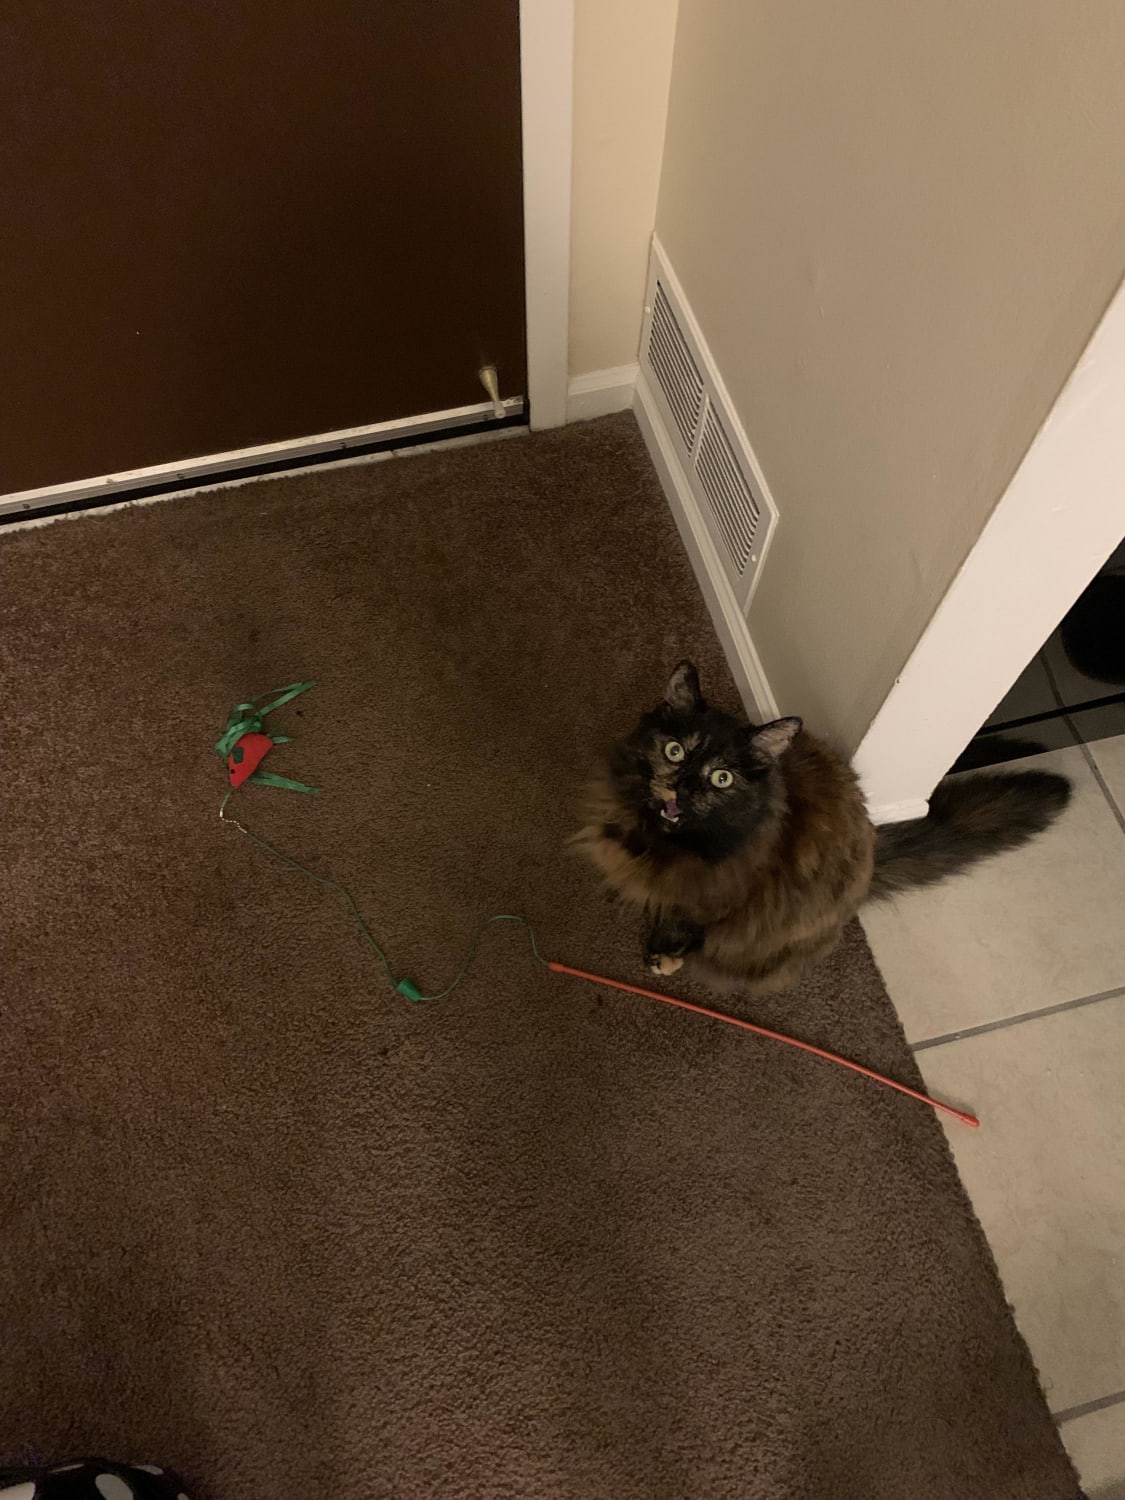 Whenever my SO and I are at work all day, our tortie, Hazel, will always set her favorite toy in front of the door. Once one of us gets home, she sits next to it and yells until it’s play time.